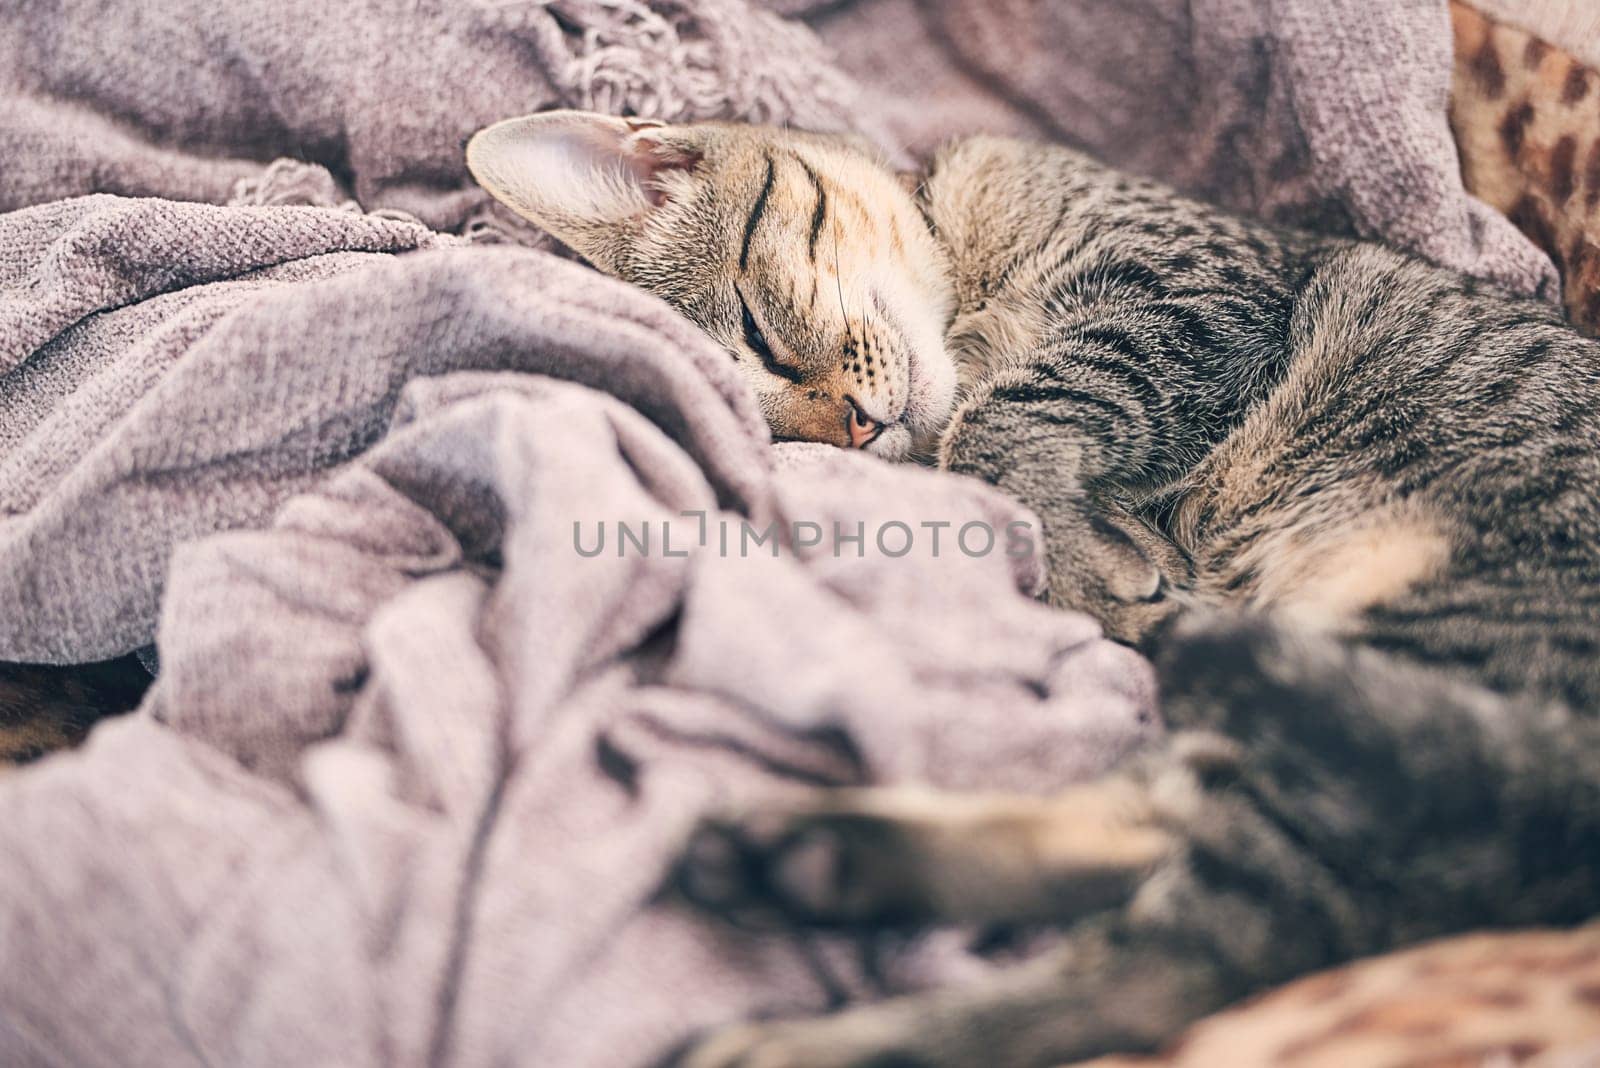 Blanket, sleeping and kitten in home for relax, resting and calm for cute, adorable and innocent pet. Animal care, bed and closeup of young cat on duvet for nap, sleep and comfortable in house by YuriArcurs